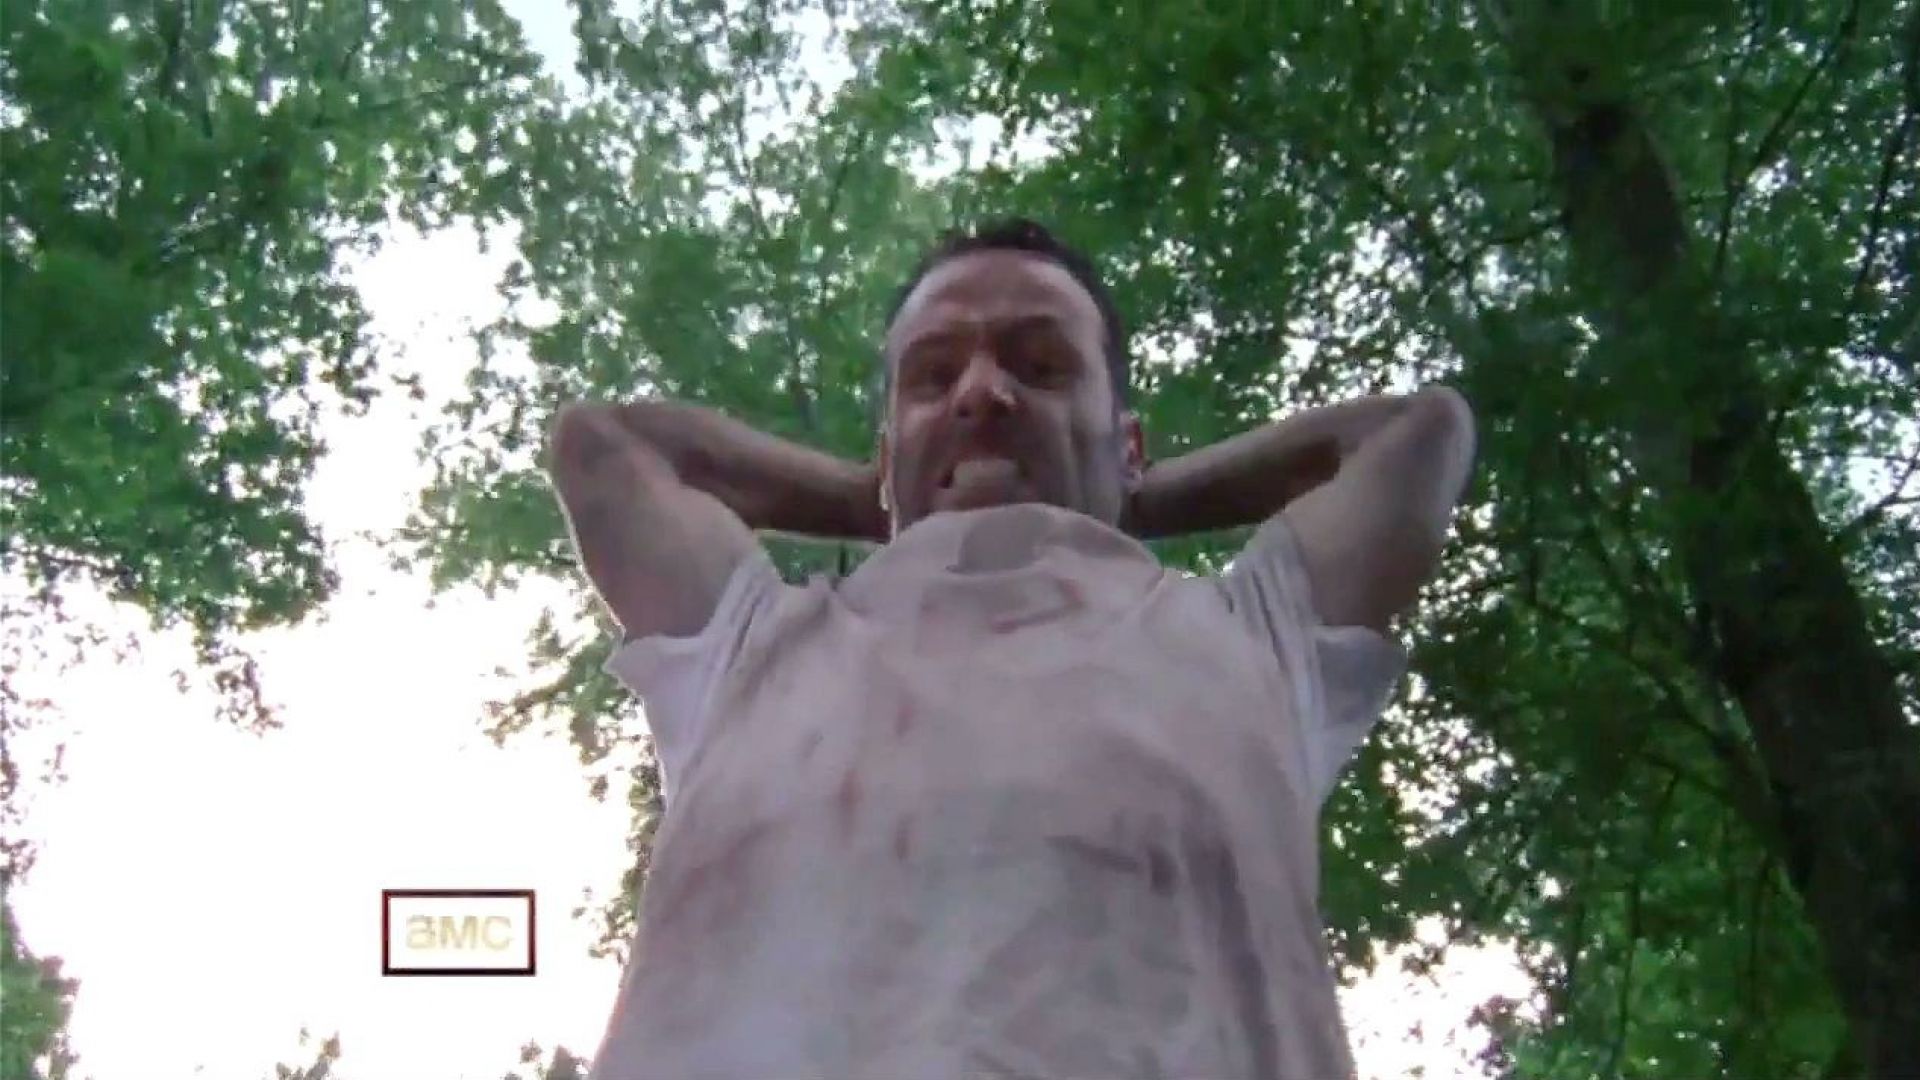 Rick Grimes awaits the zombies in The Walking Dead season two